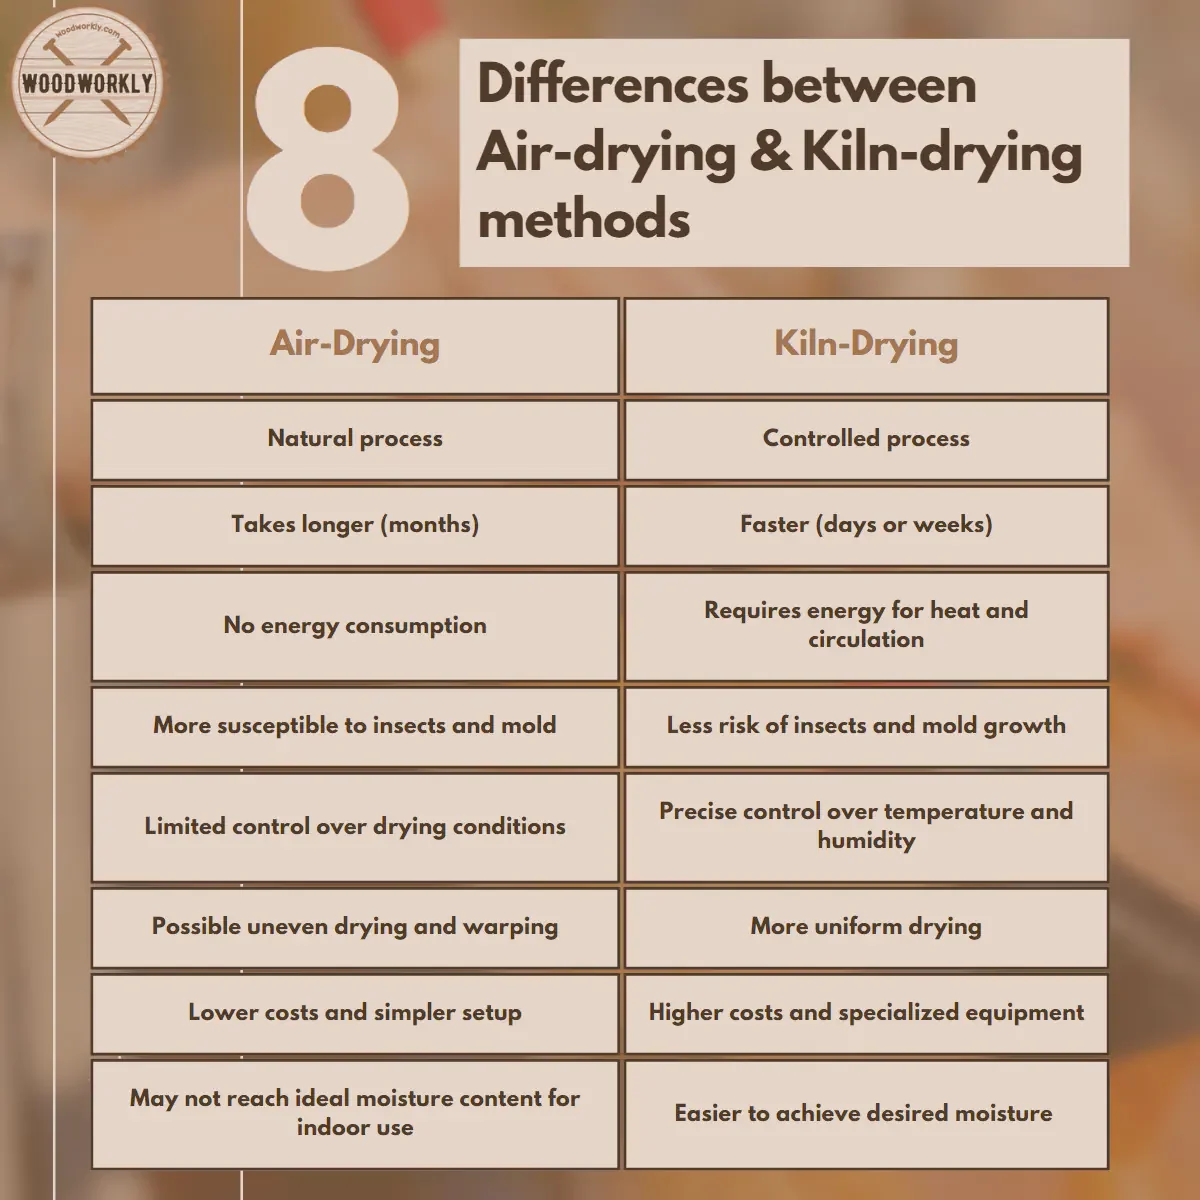 Differences between Air-drying & Kiln-drying methods